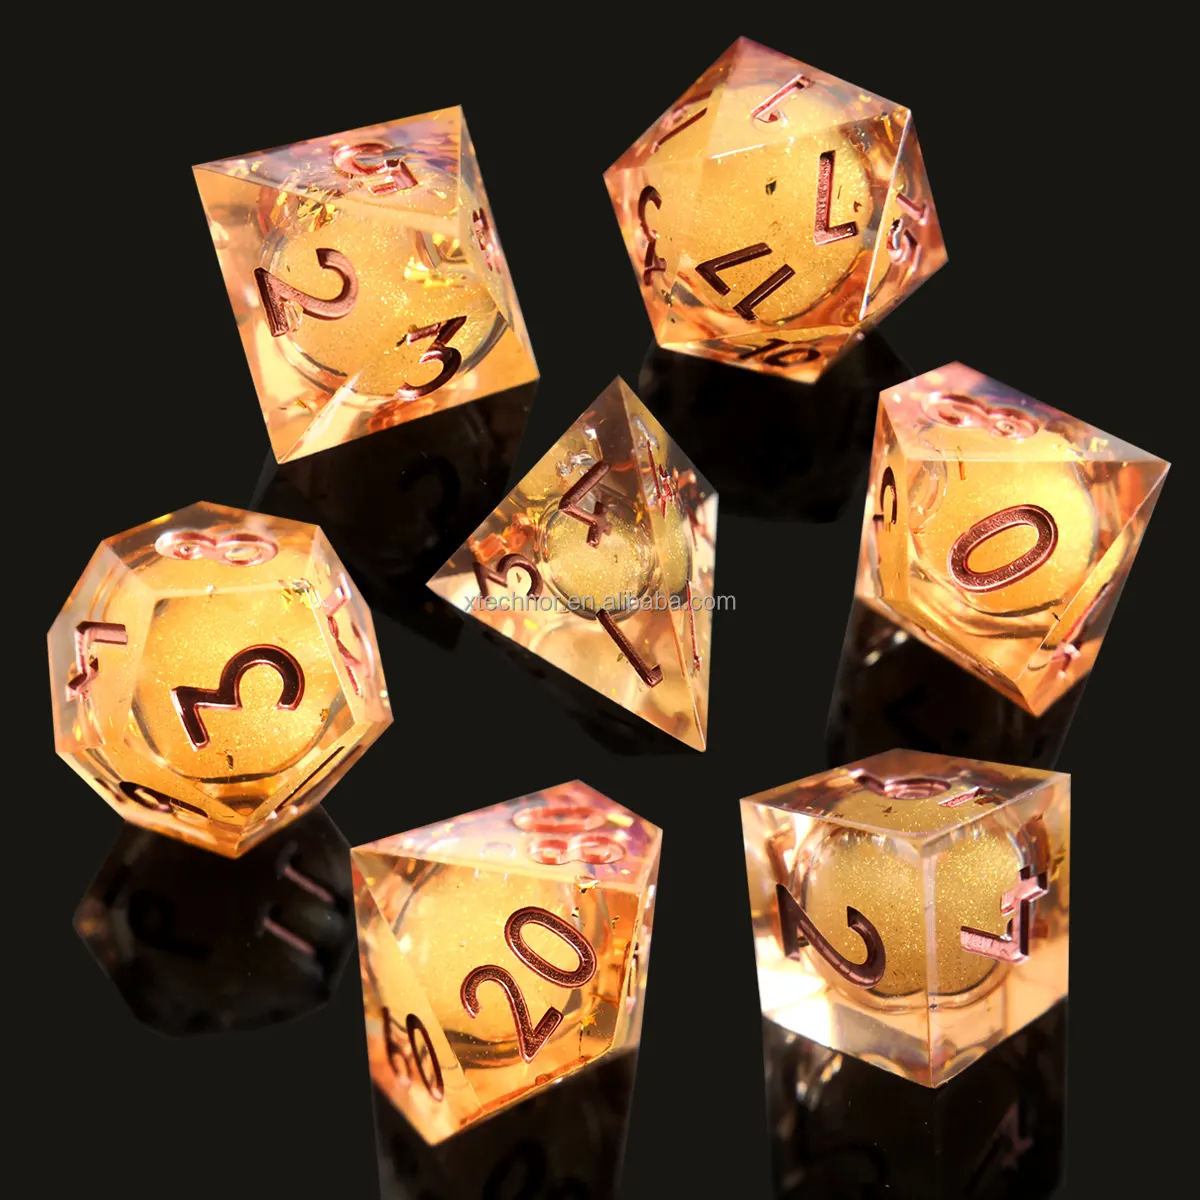 Liquid Core Dice Full Set Handmade Resin Sharp Edge Polyhedral DnD Dice Set For Role Playing Games Gold Dices